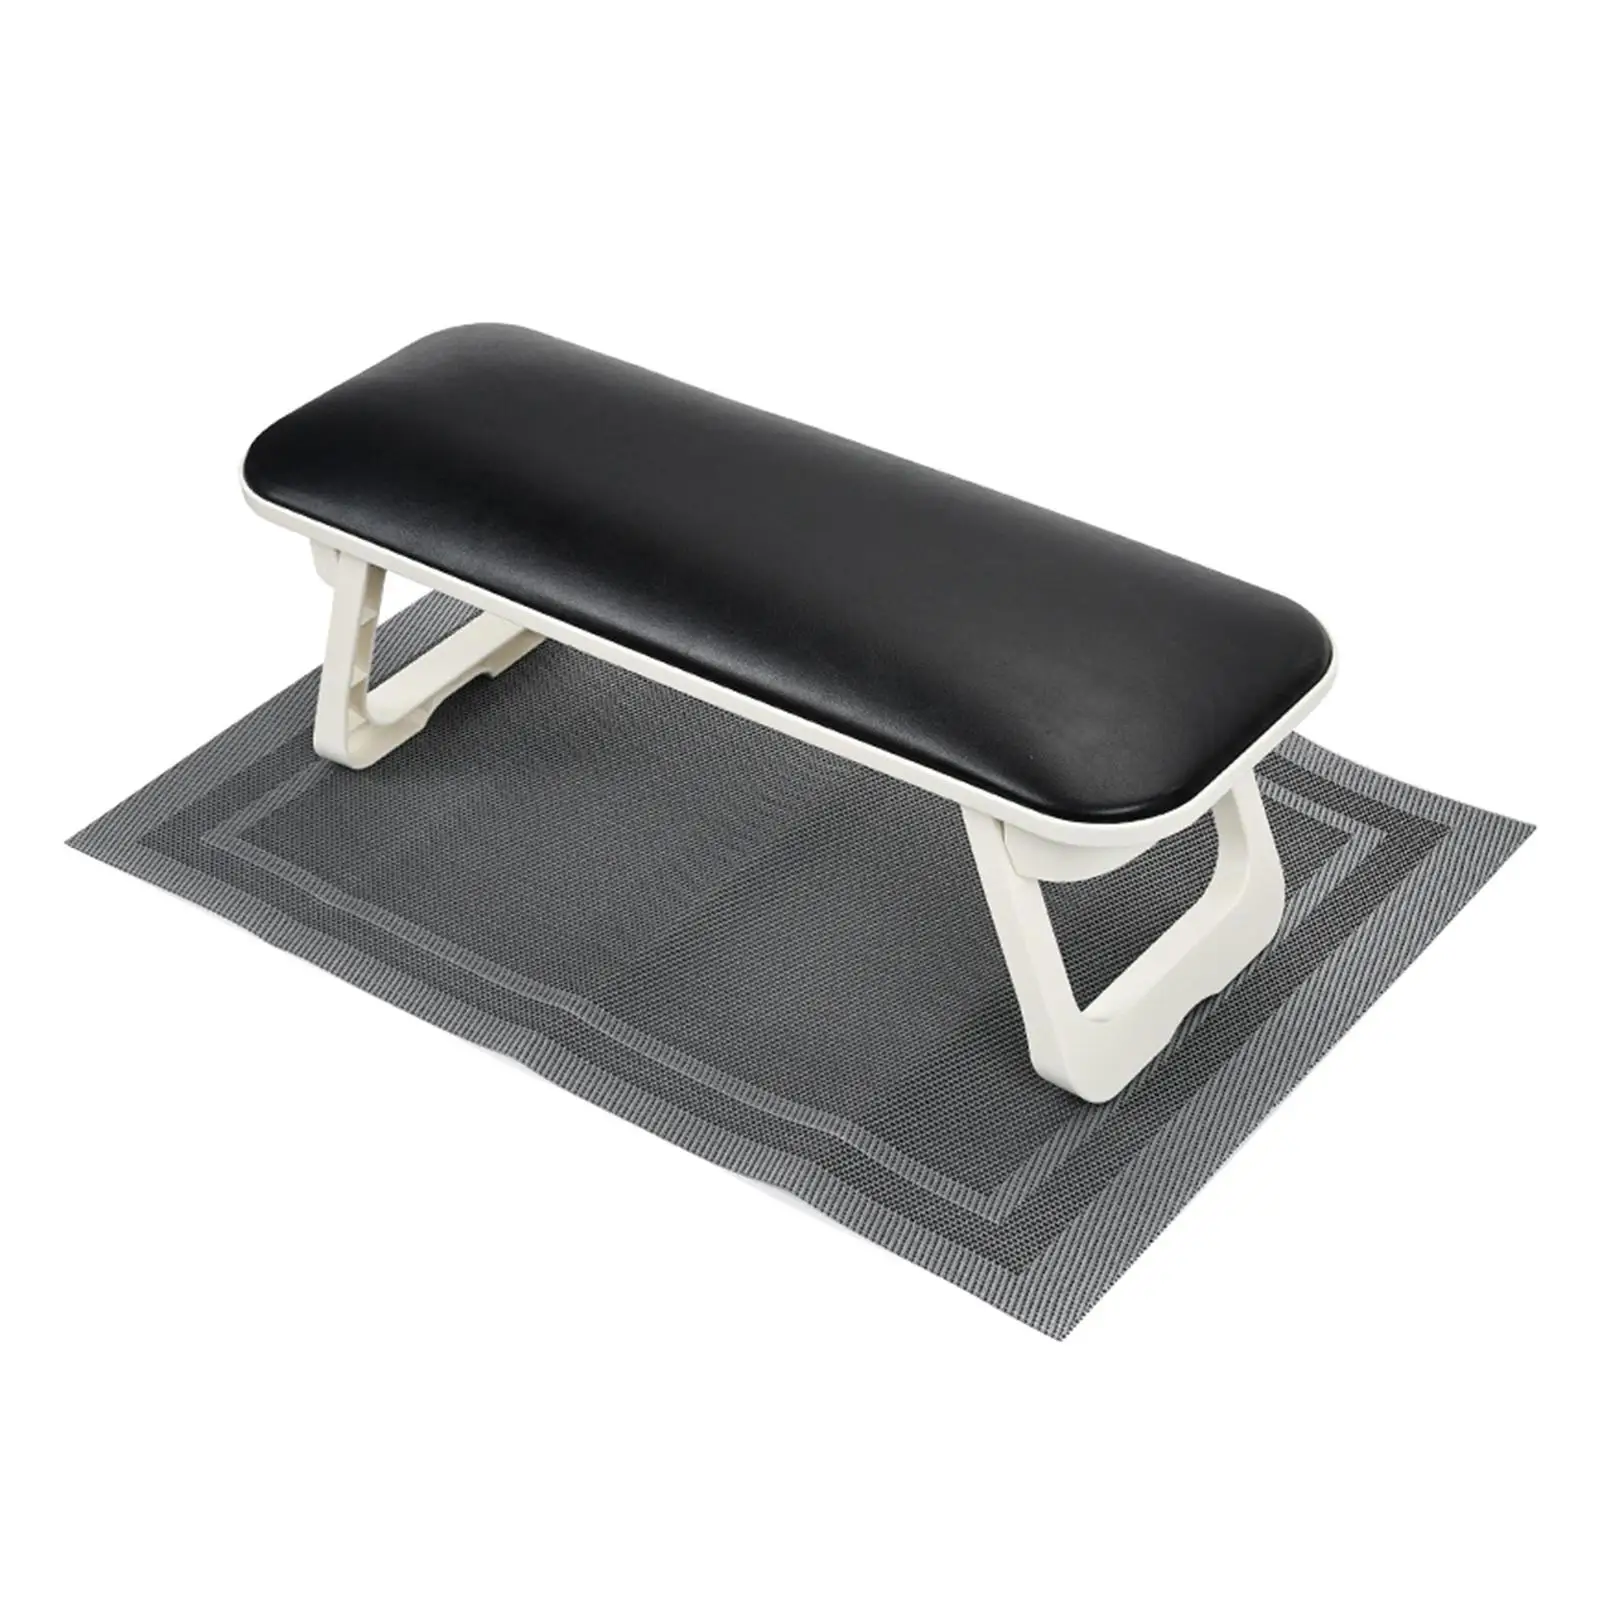 Nail Arm Rest Comfortable Support Table Desk Station for Nails Tech Salon Home Use Manicure Hand Cushion Nail Stand Hand Holder